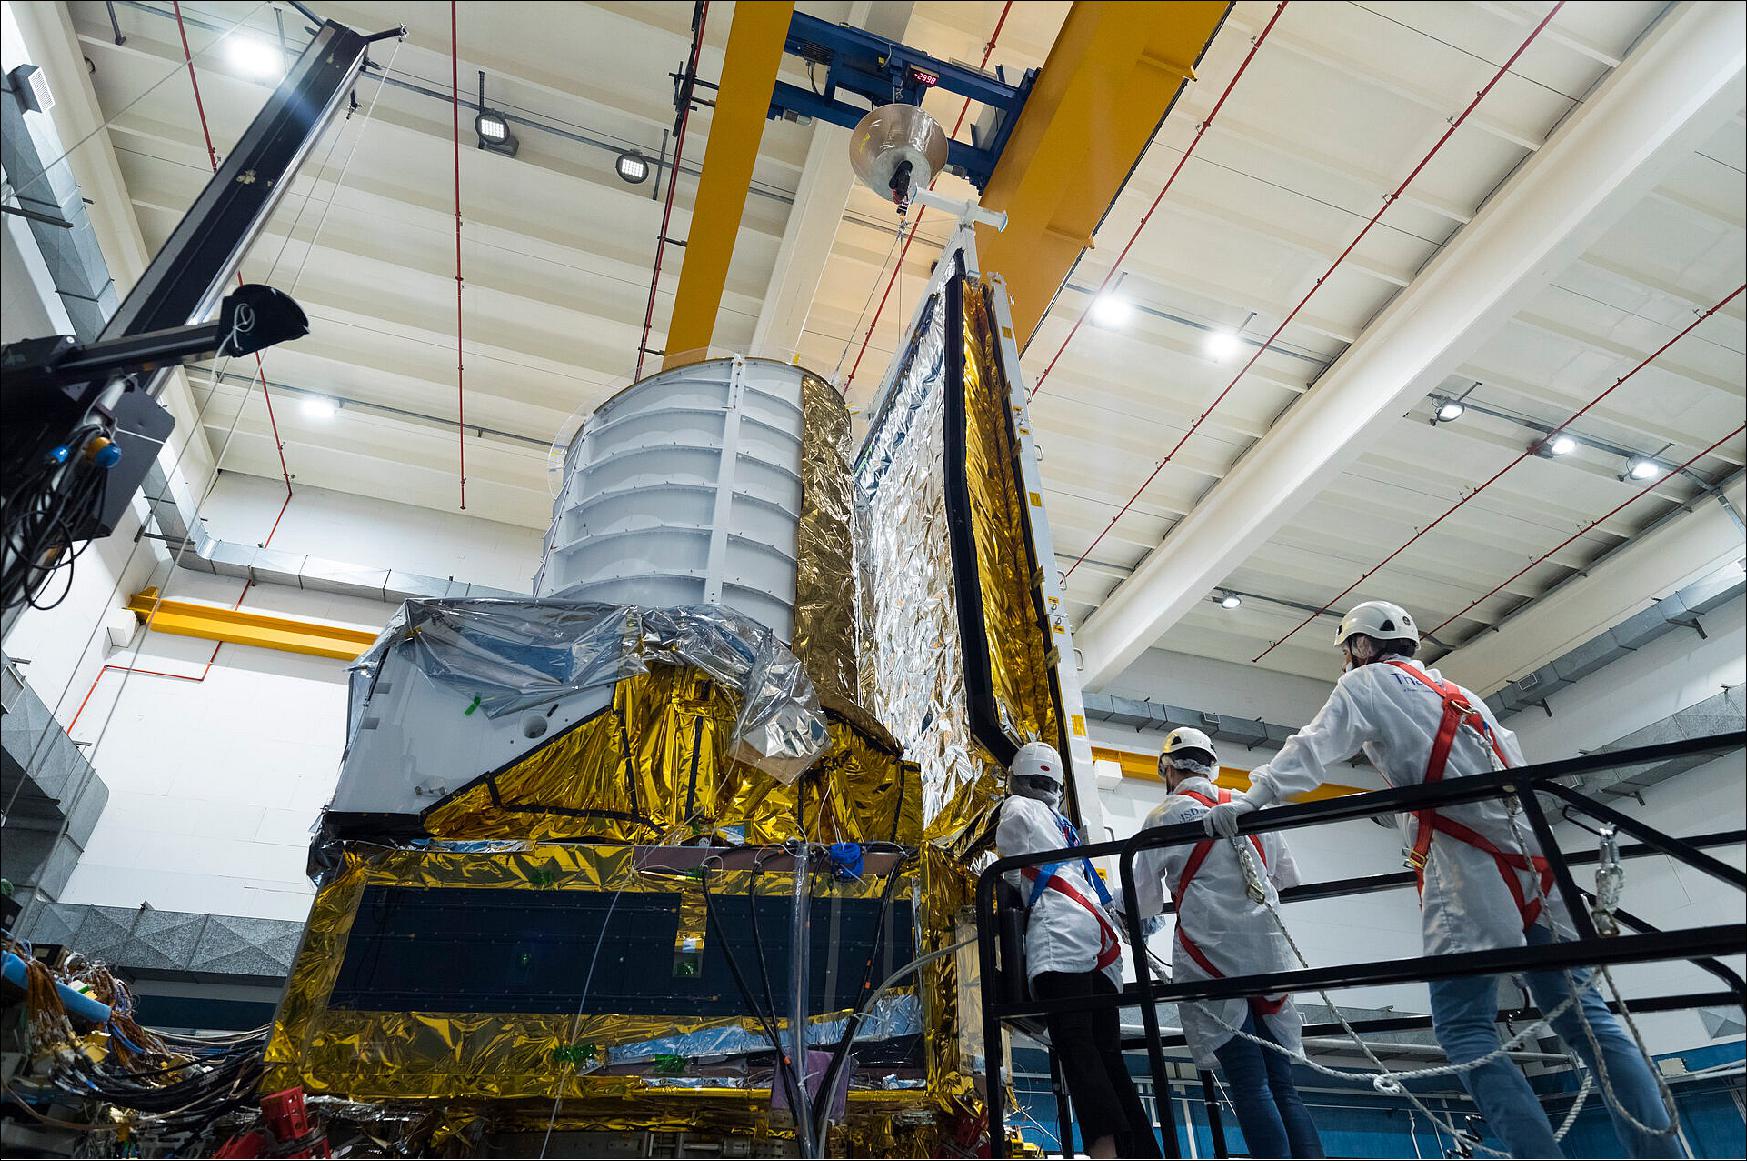 Figure 18: In this image, taken on 23 May 2022, engineers at Thales Alenia Space in Turin are attaching a combined sunshield and solar panel module to the main body of ESA’s Euclid spacecraft. The module has two functions: whilst the solar panels will provide the spacecraft with power, the sunshield will shade the instrument-carrying payload module from the Sun’s intense radiation (image credit: ESA, S. Corvaja)